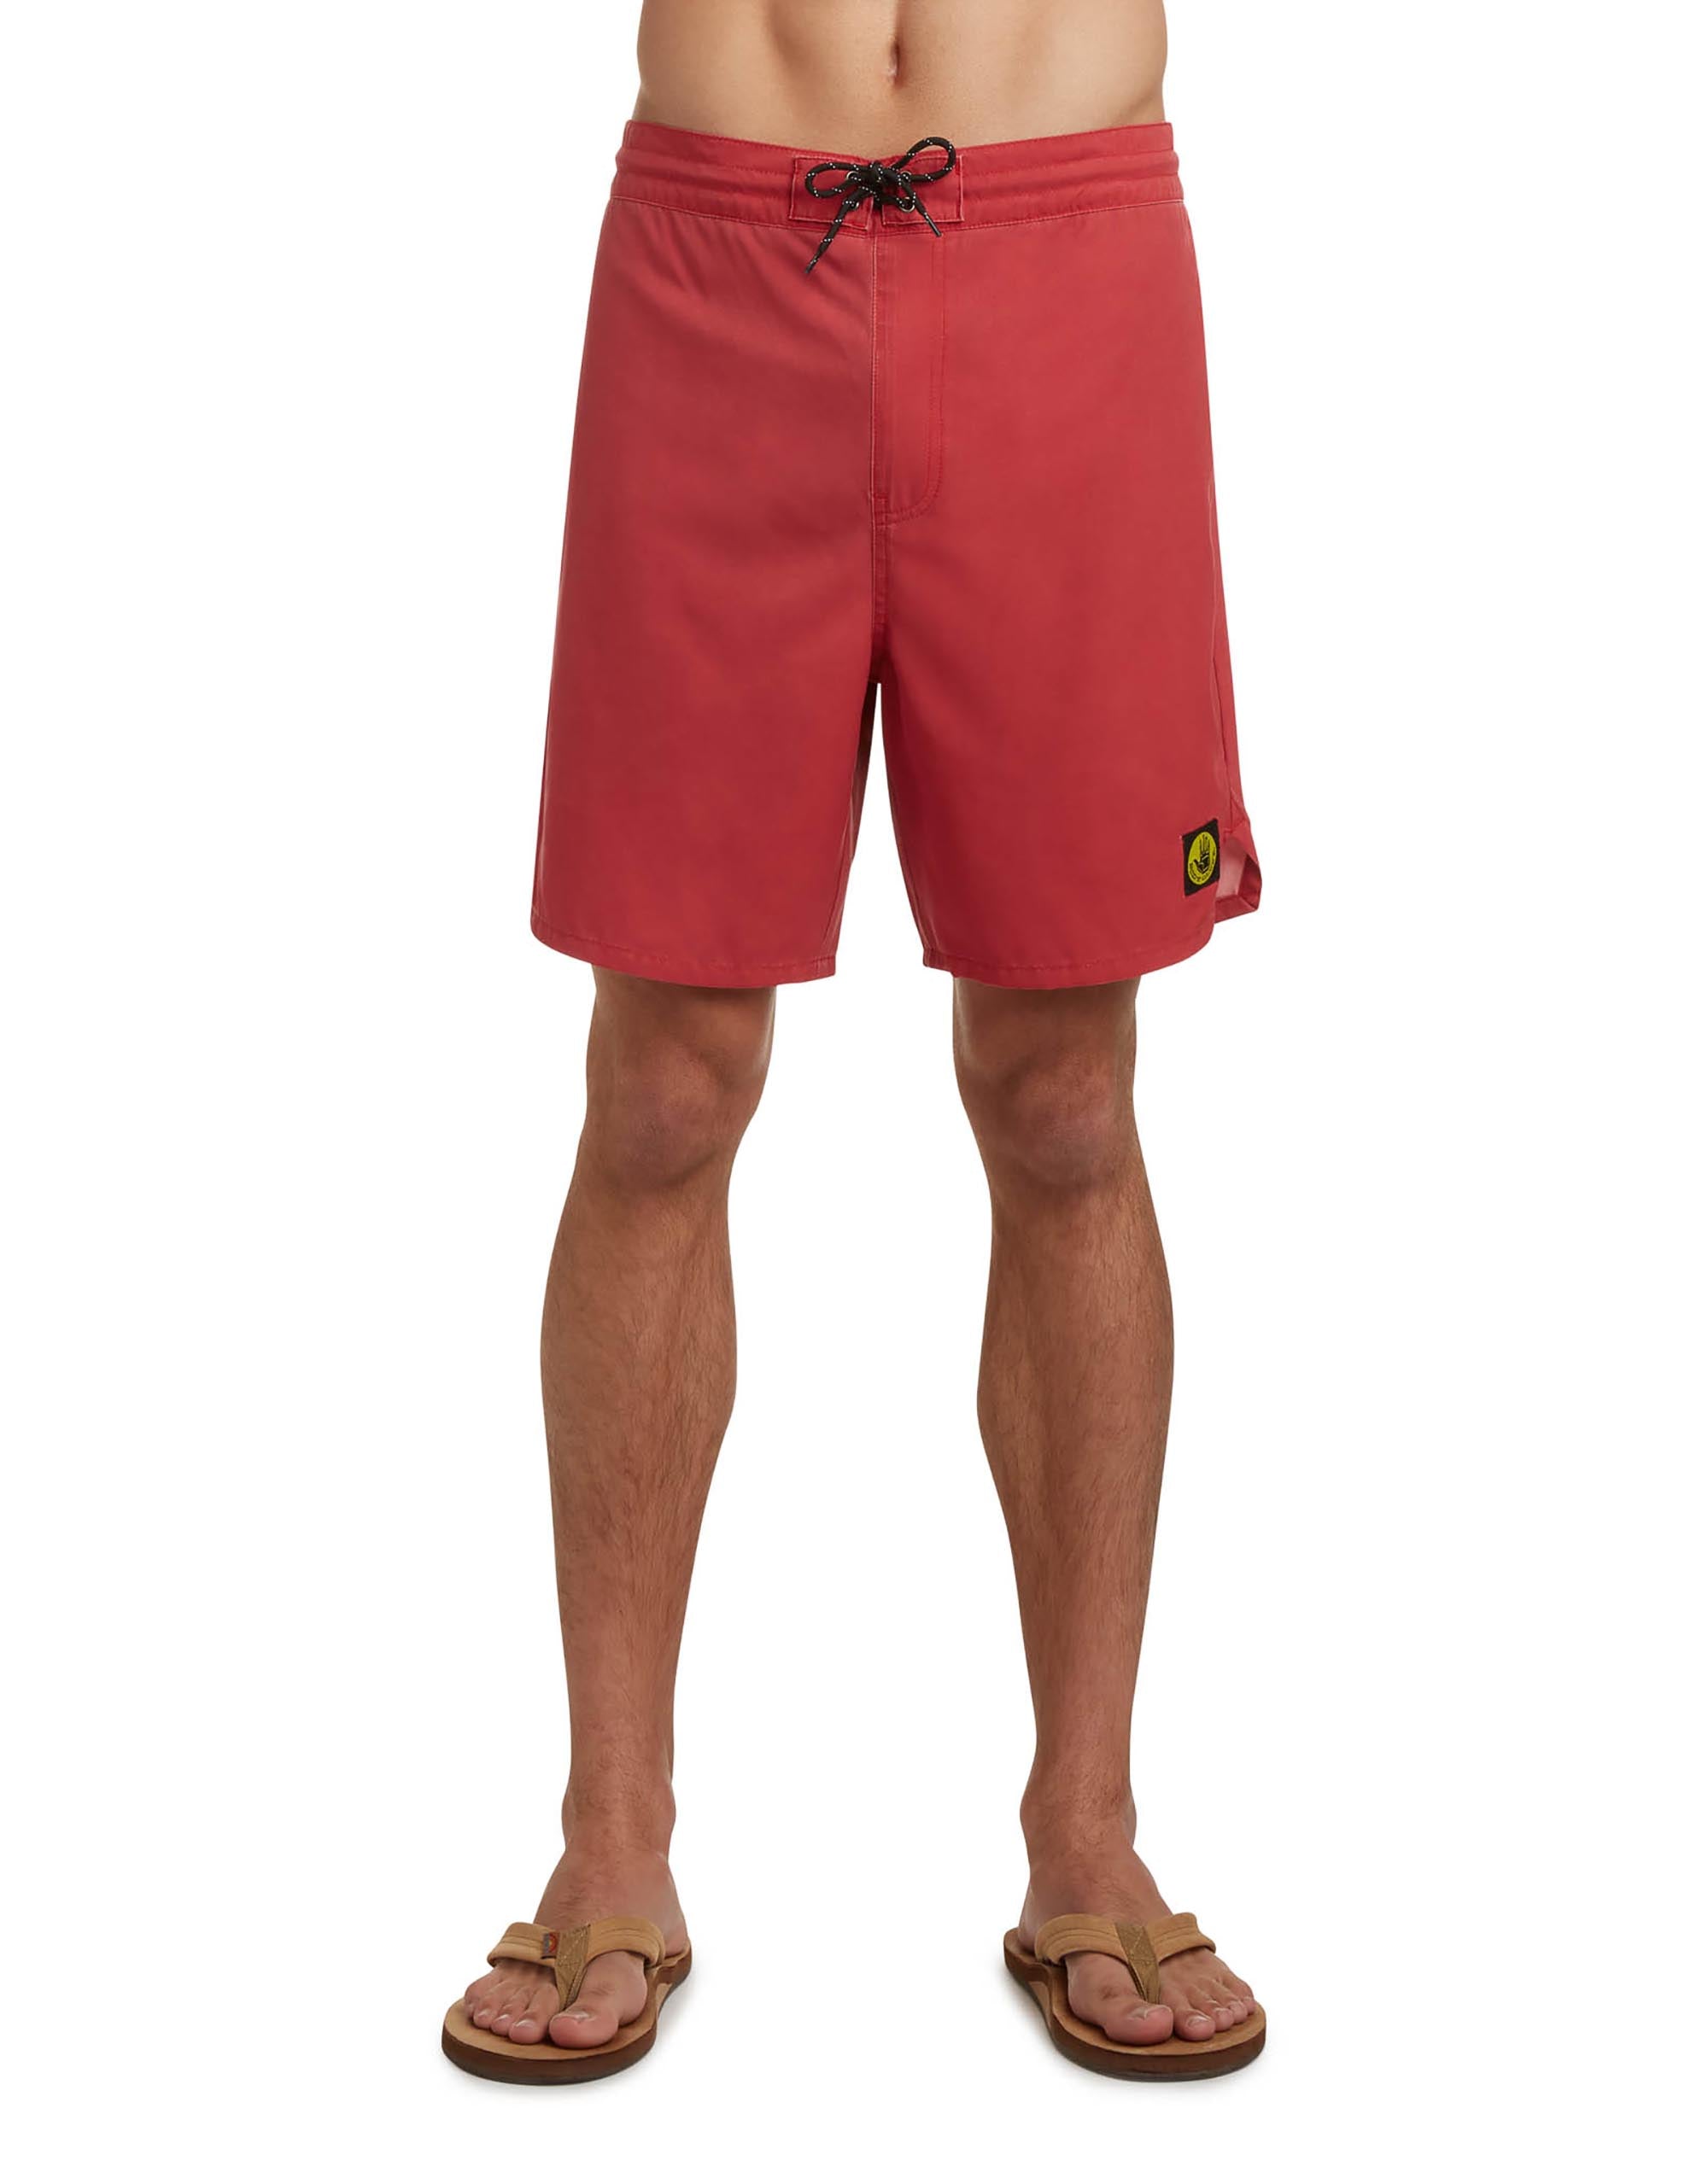 Floaters 19" Comfort Boardshorts - Red